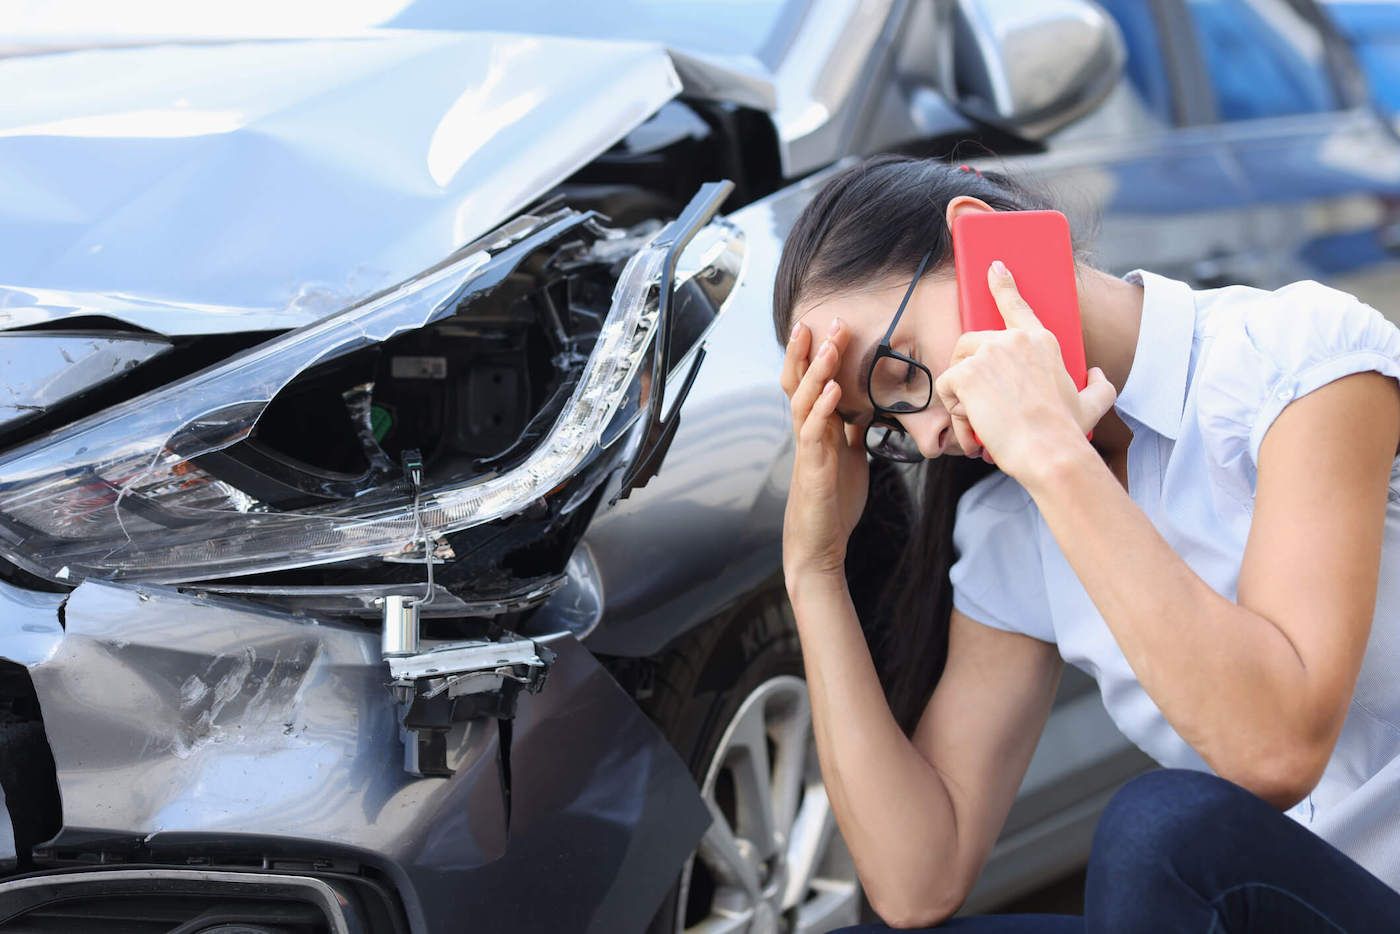 What All Drivers Should Know from the Crash Prevention Experts at